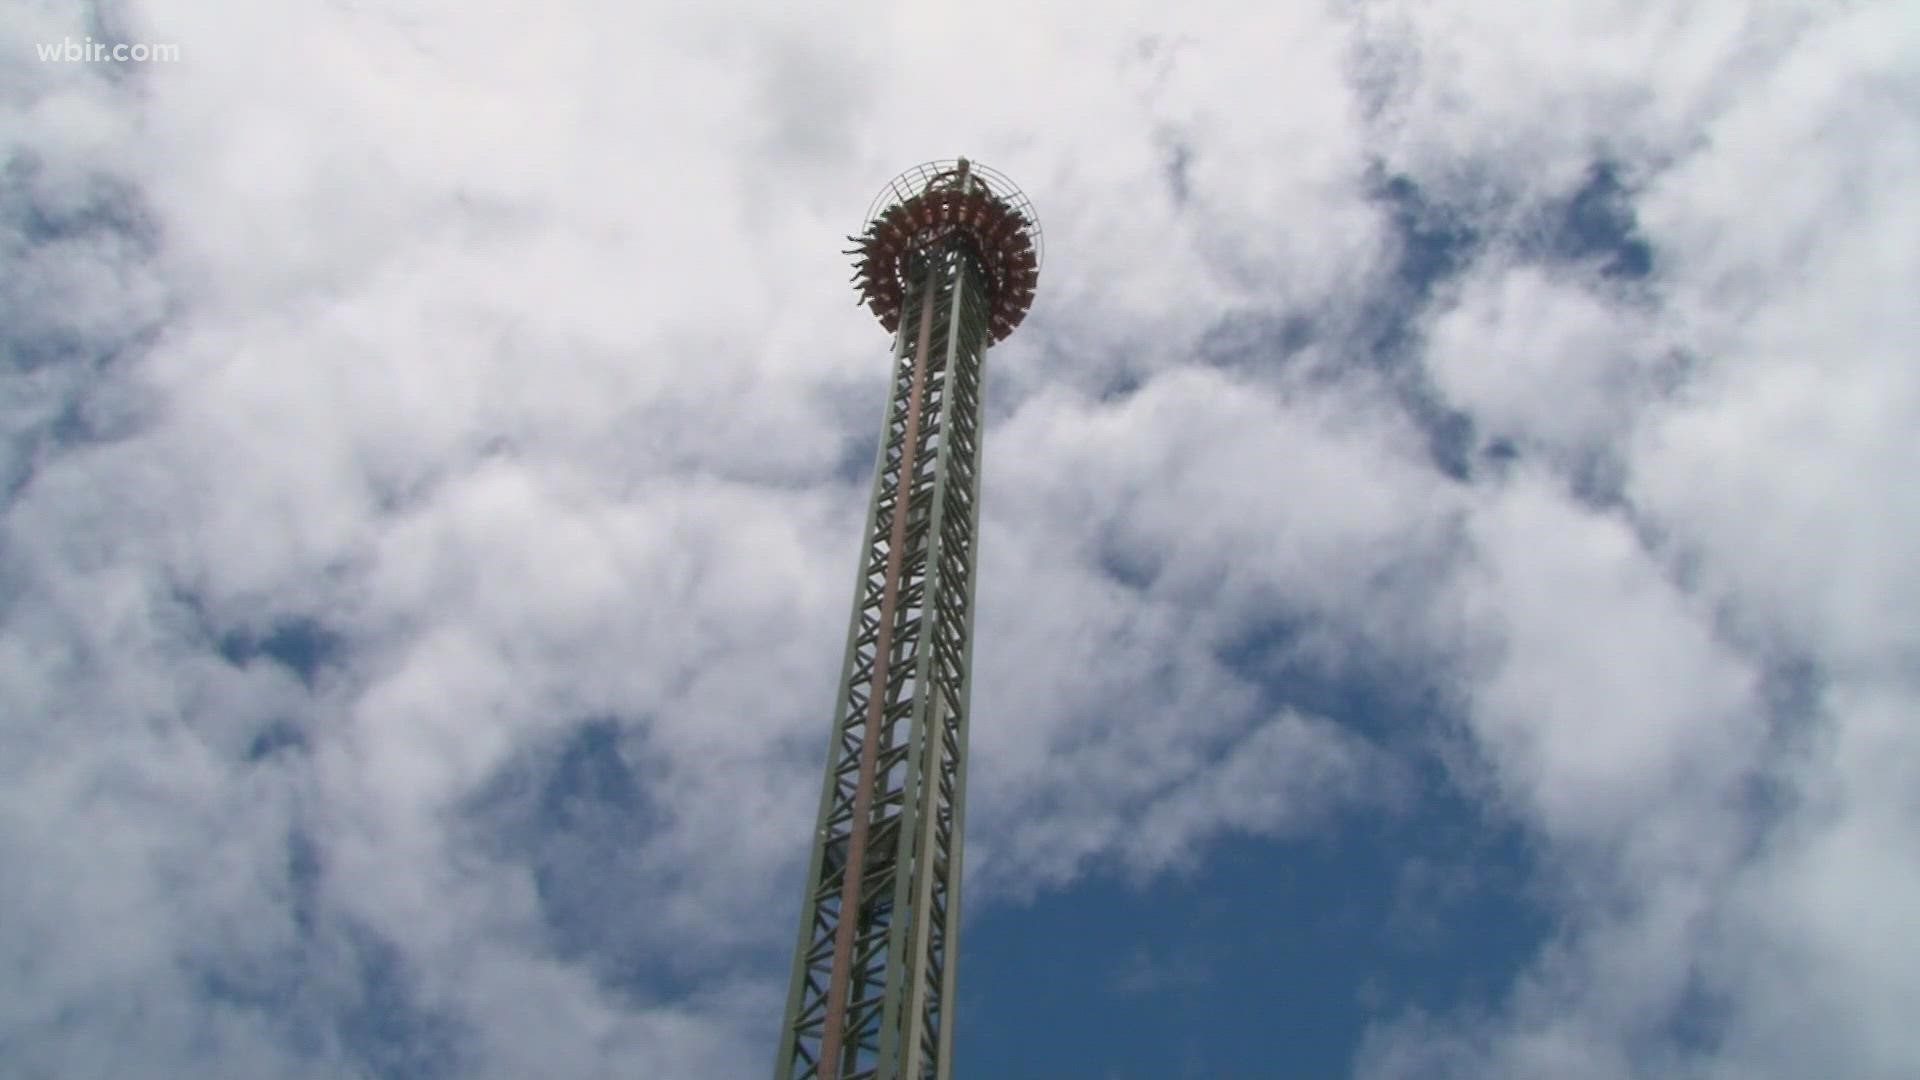 This comes after a 14-year-old died last week after falling off a similar-style ride at ICON park in Orlando, Florida.